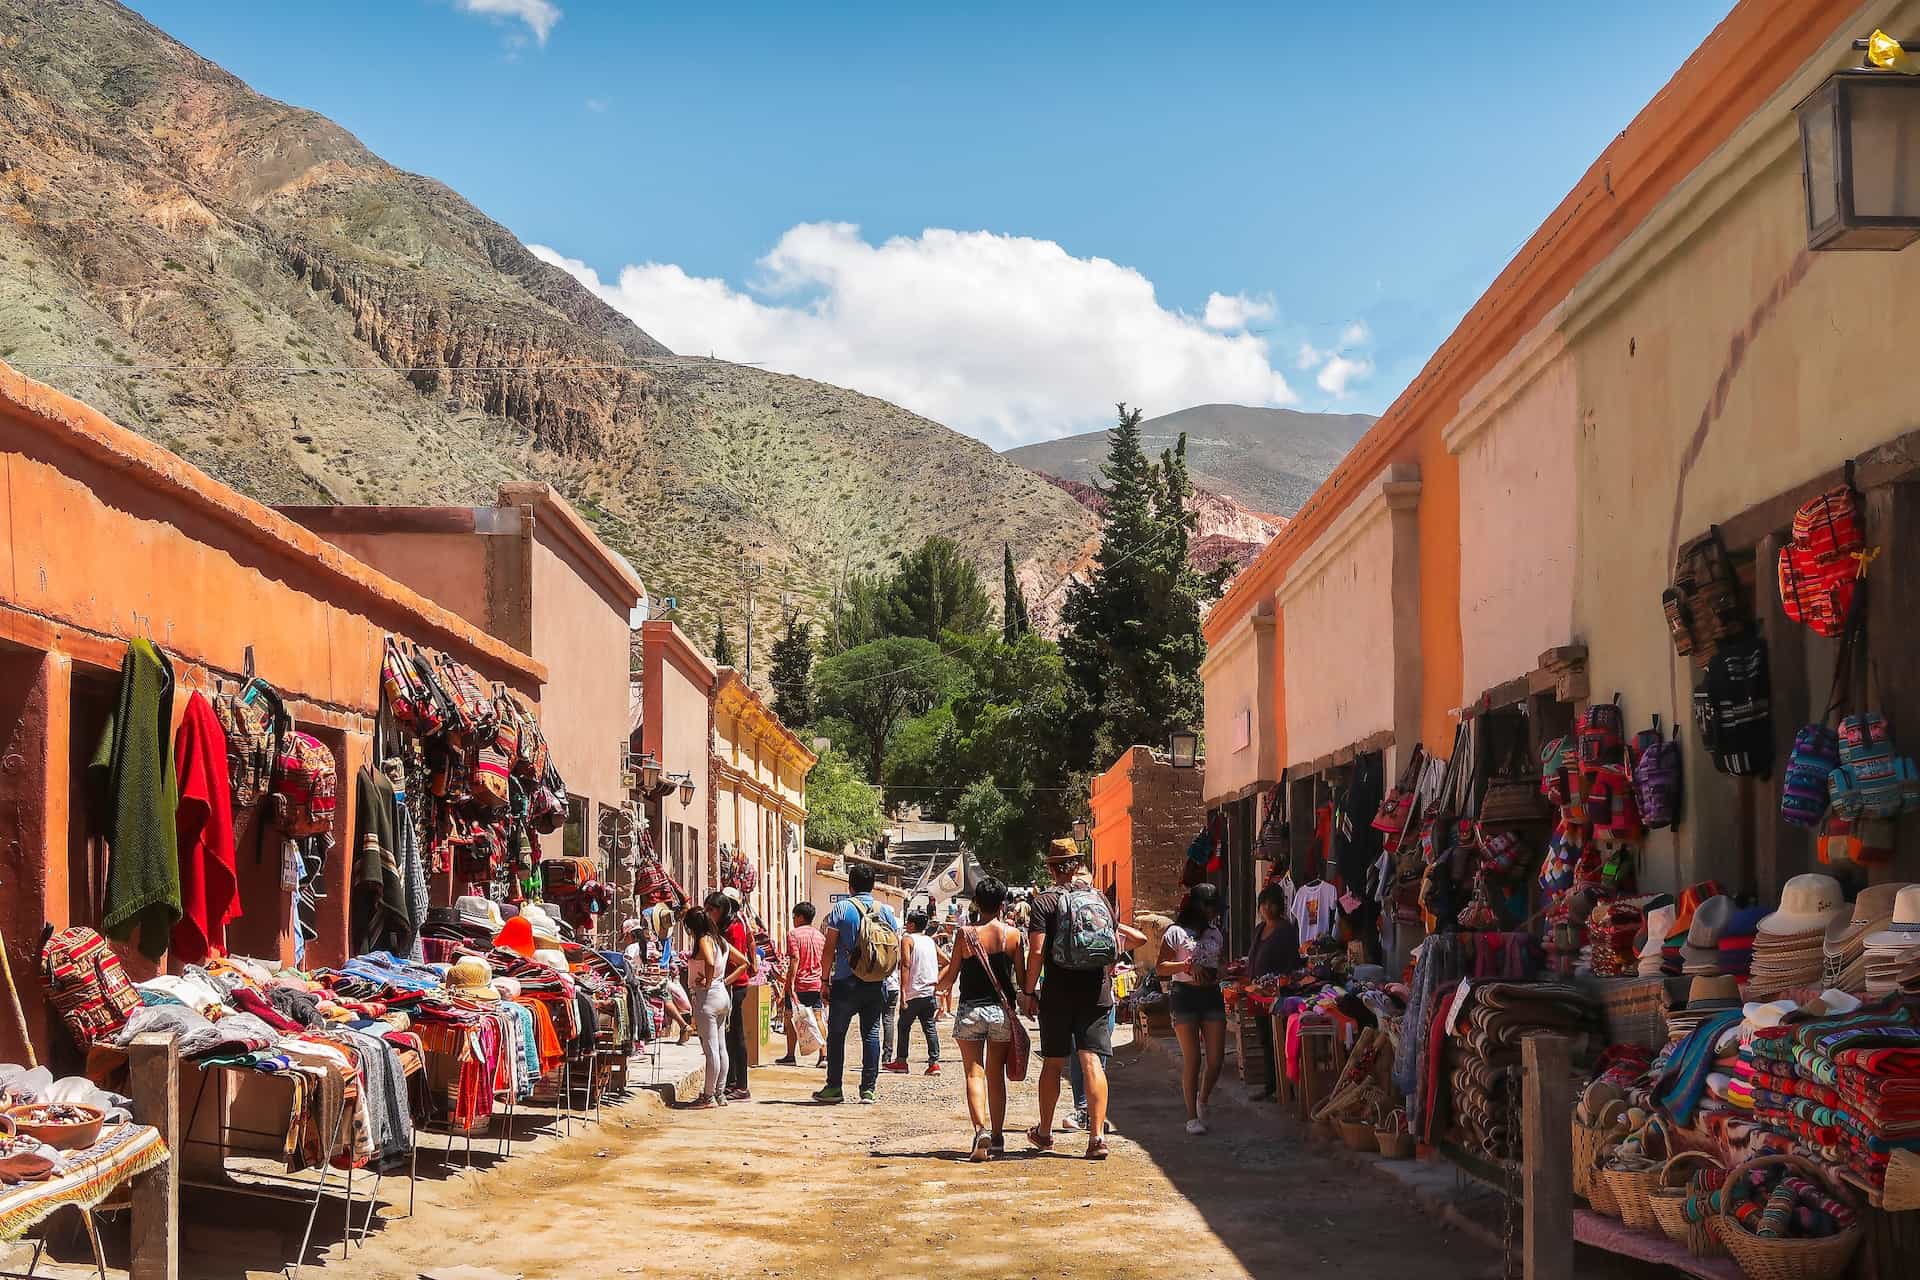 A busy street in Purmamarca, Jujuy, Argentina, with street vendors and red buildings.